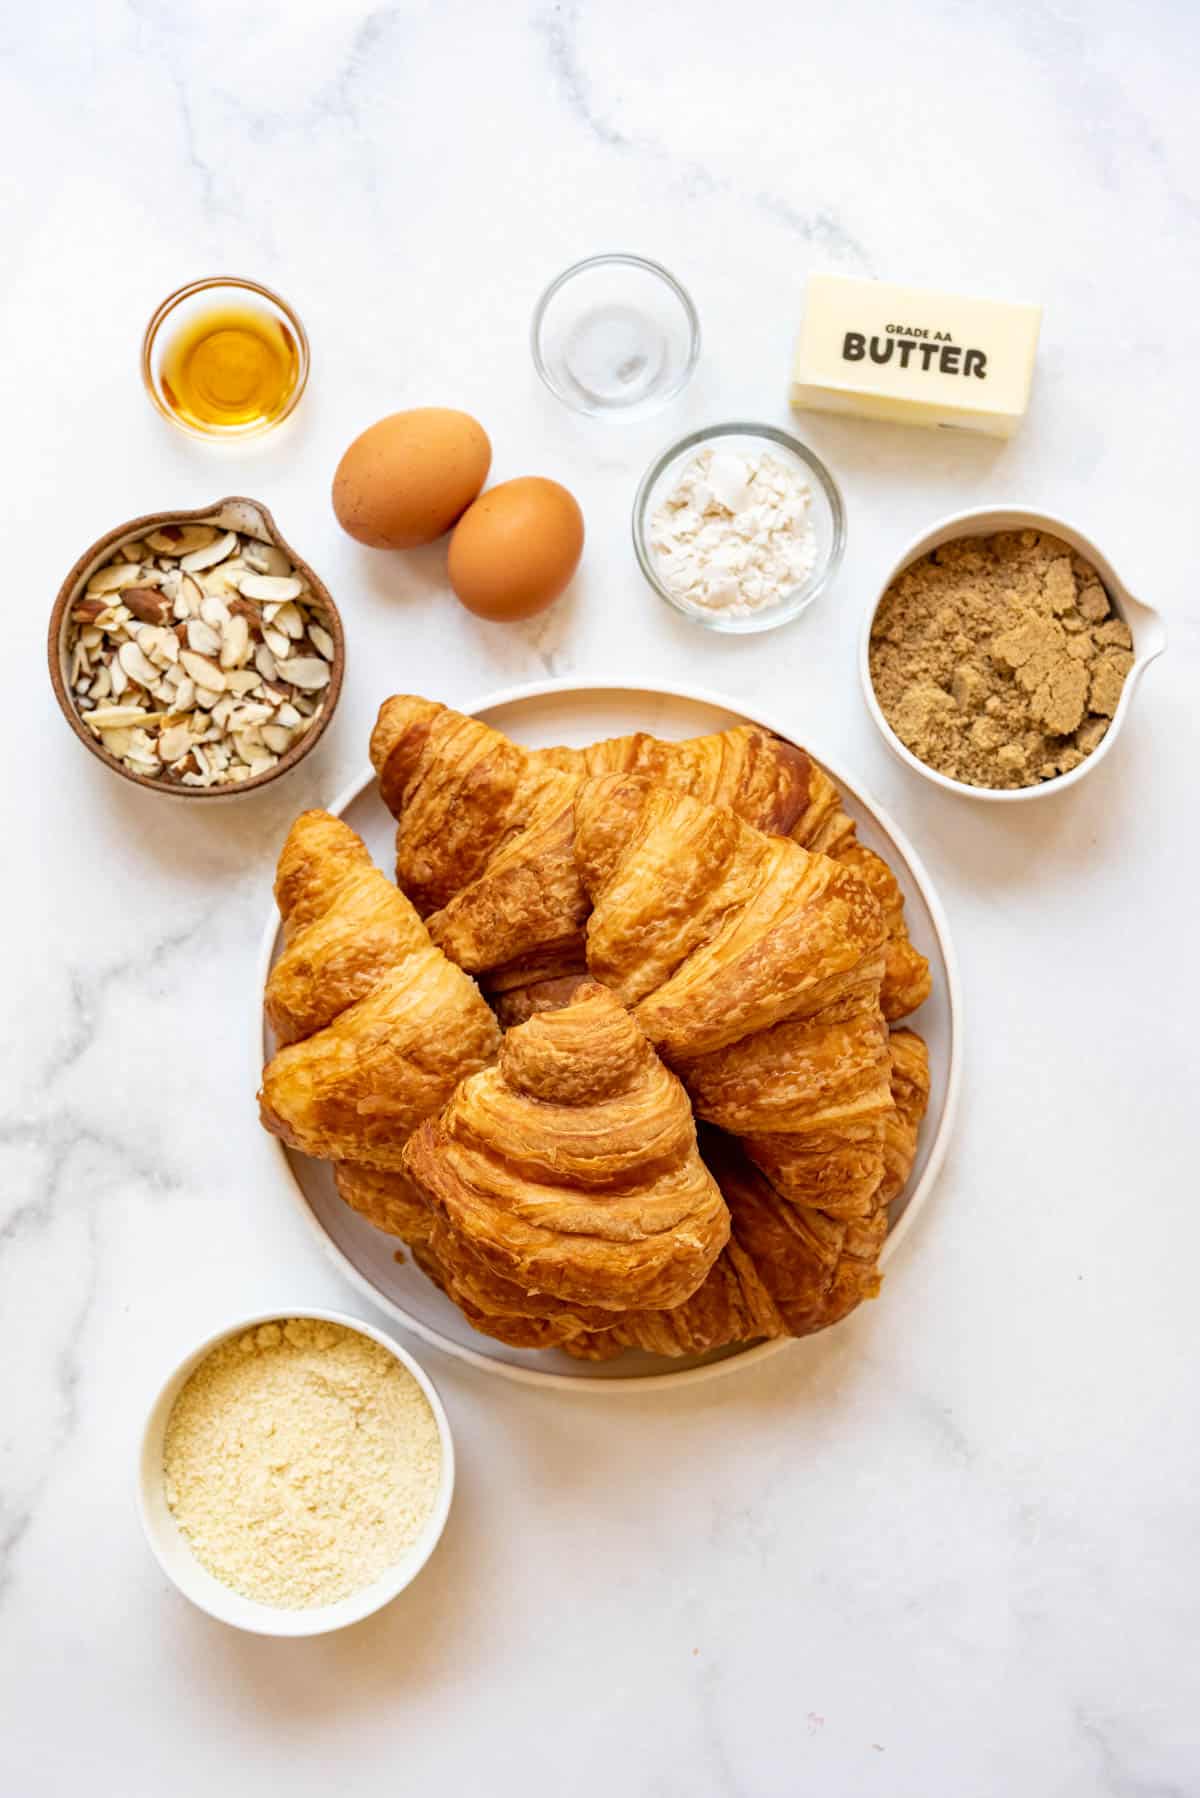 Ingredients for easy almond croissants.